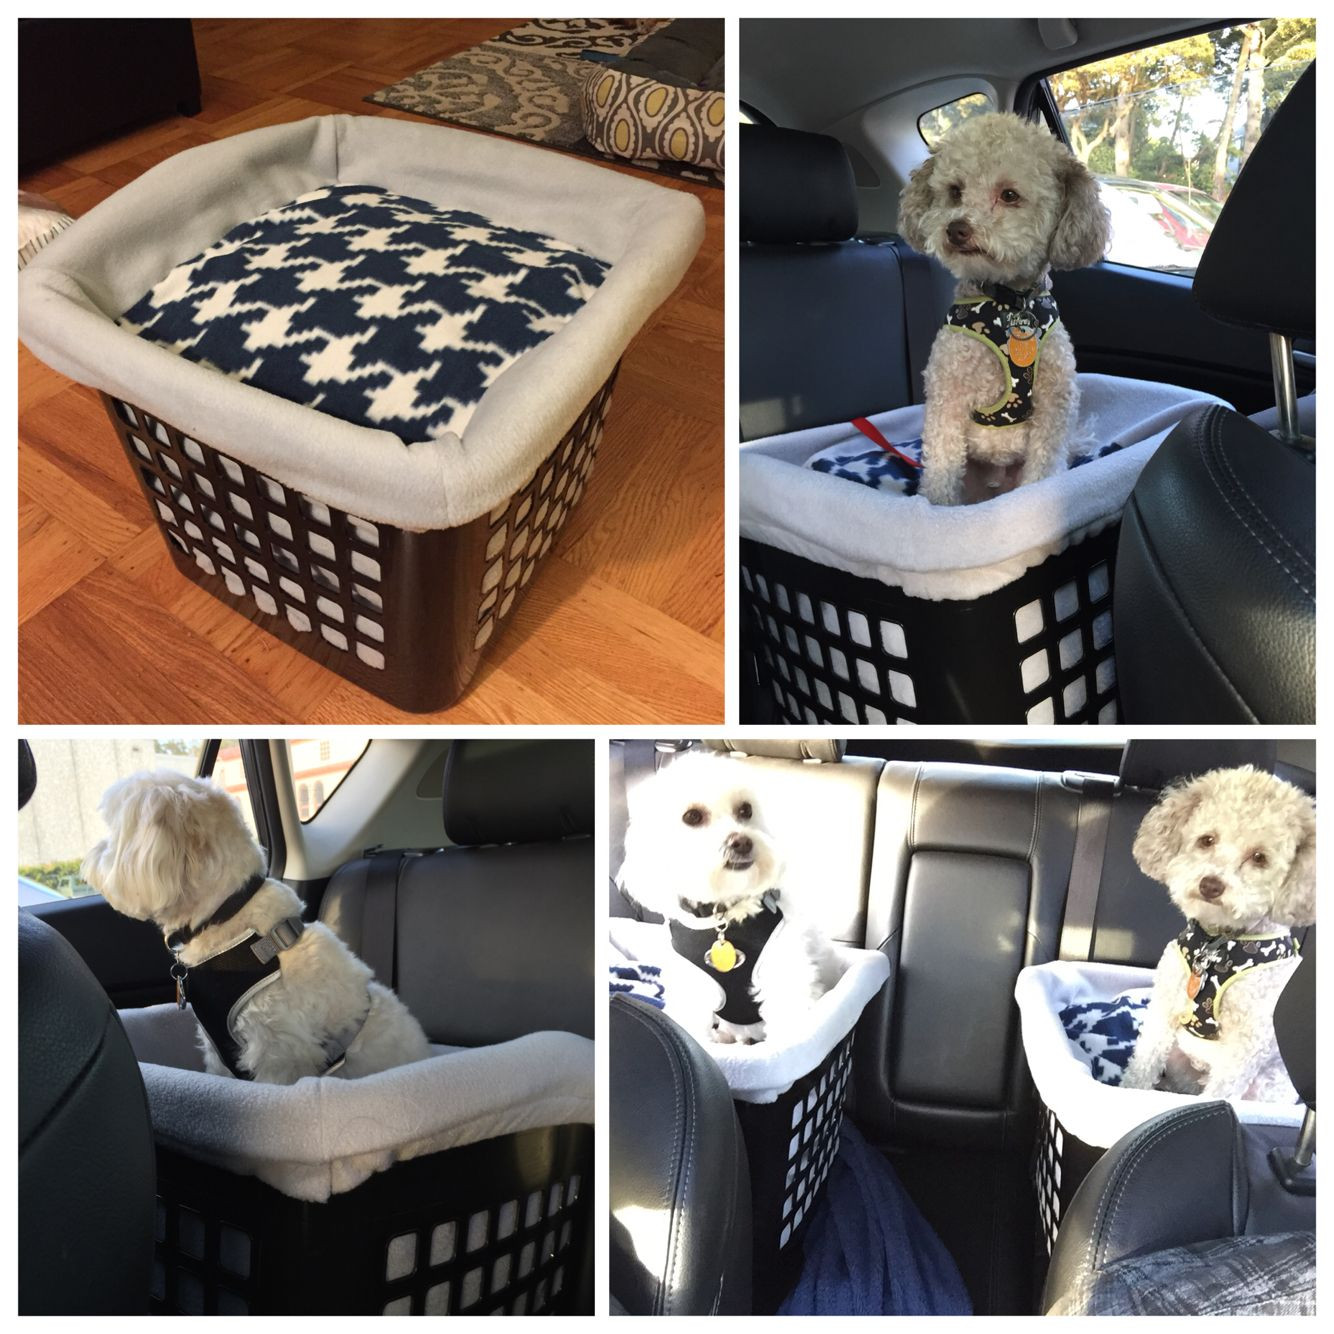 DIY Dog Car Booster Seat
 DIY dog booster seat for the car Cut out two bigger holes